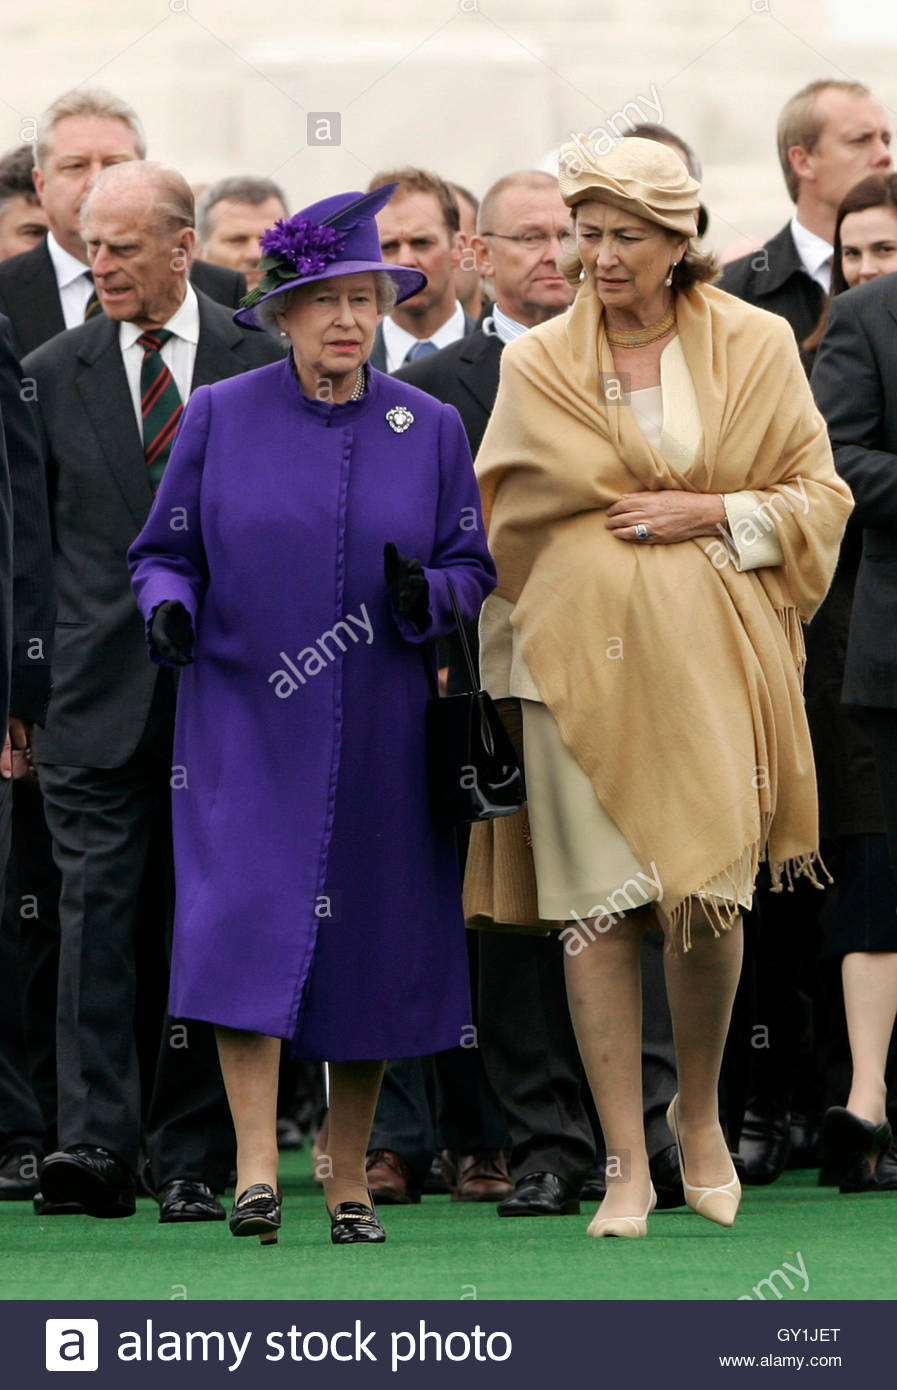 britains-queen-elizabeth-and-belgiums-queen-paola-r-leave-tyne-cot-GY1JET.jpg